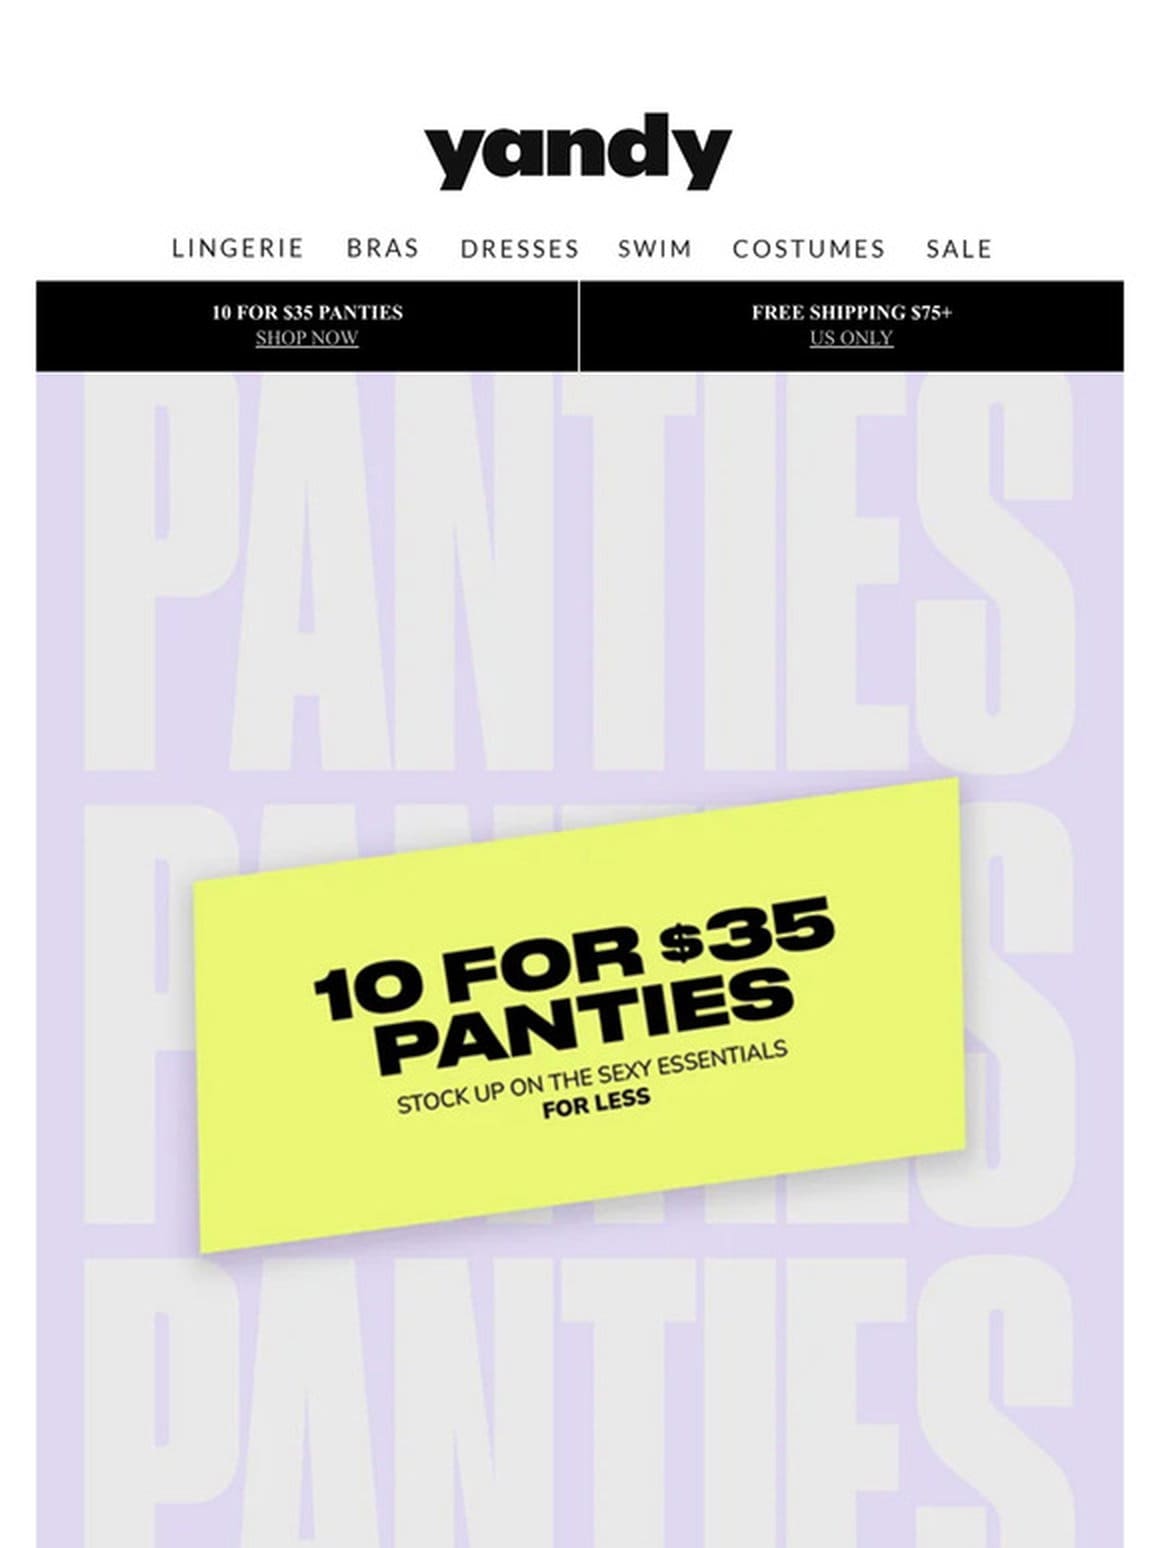 10 for $35 Panties Happening NOW